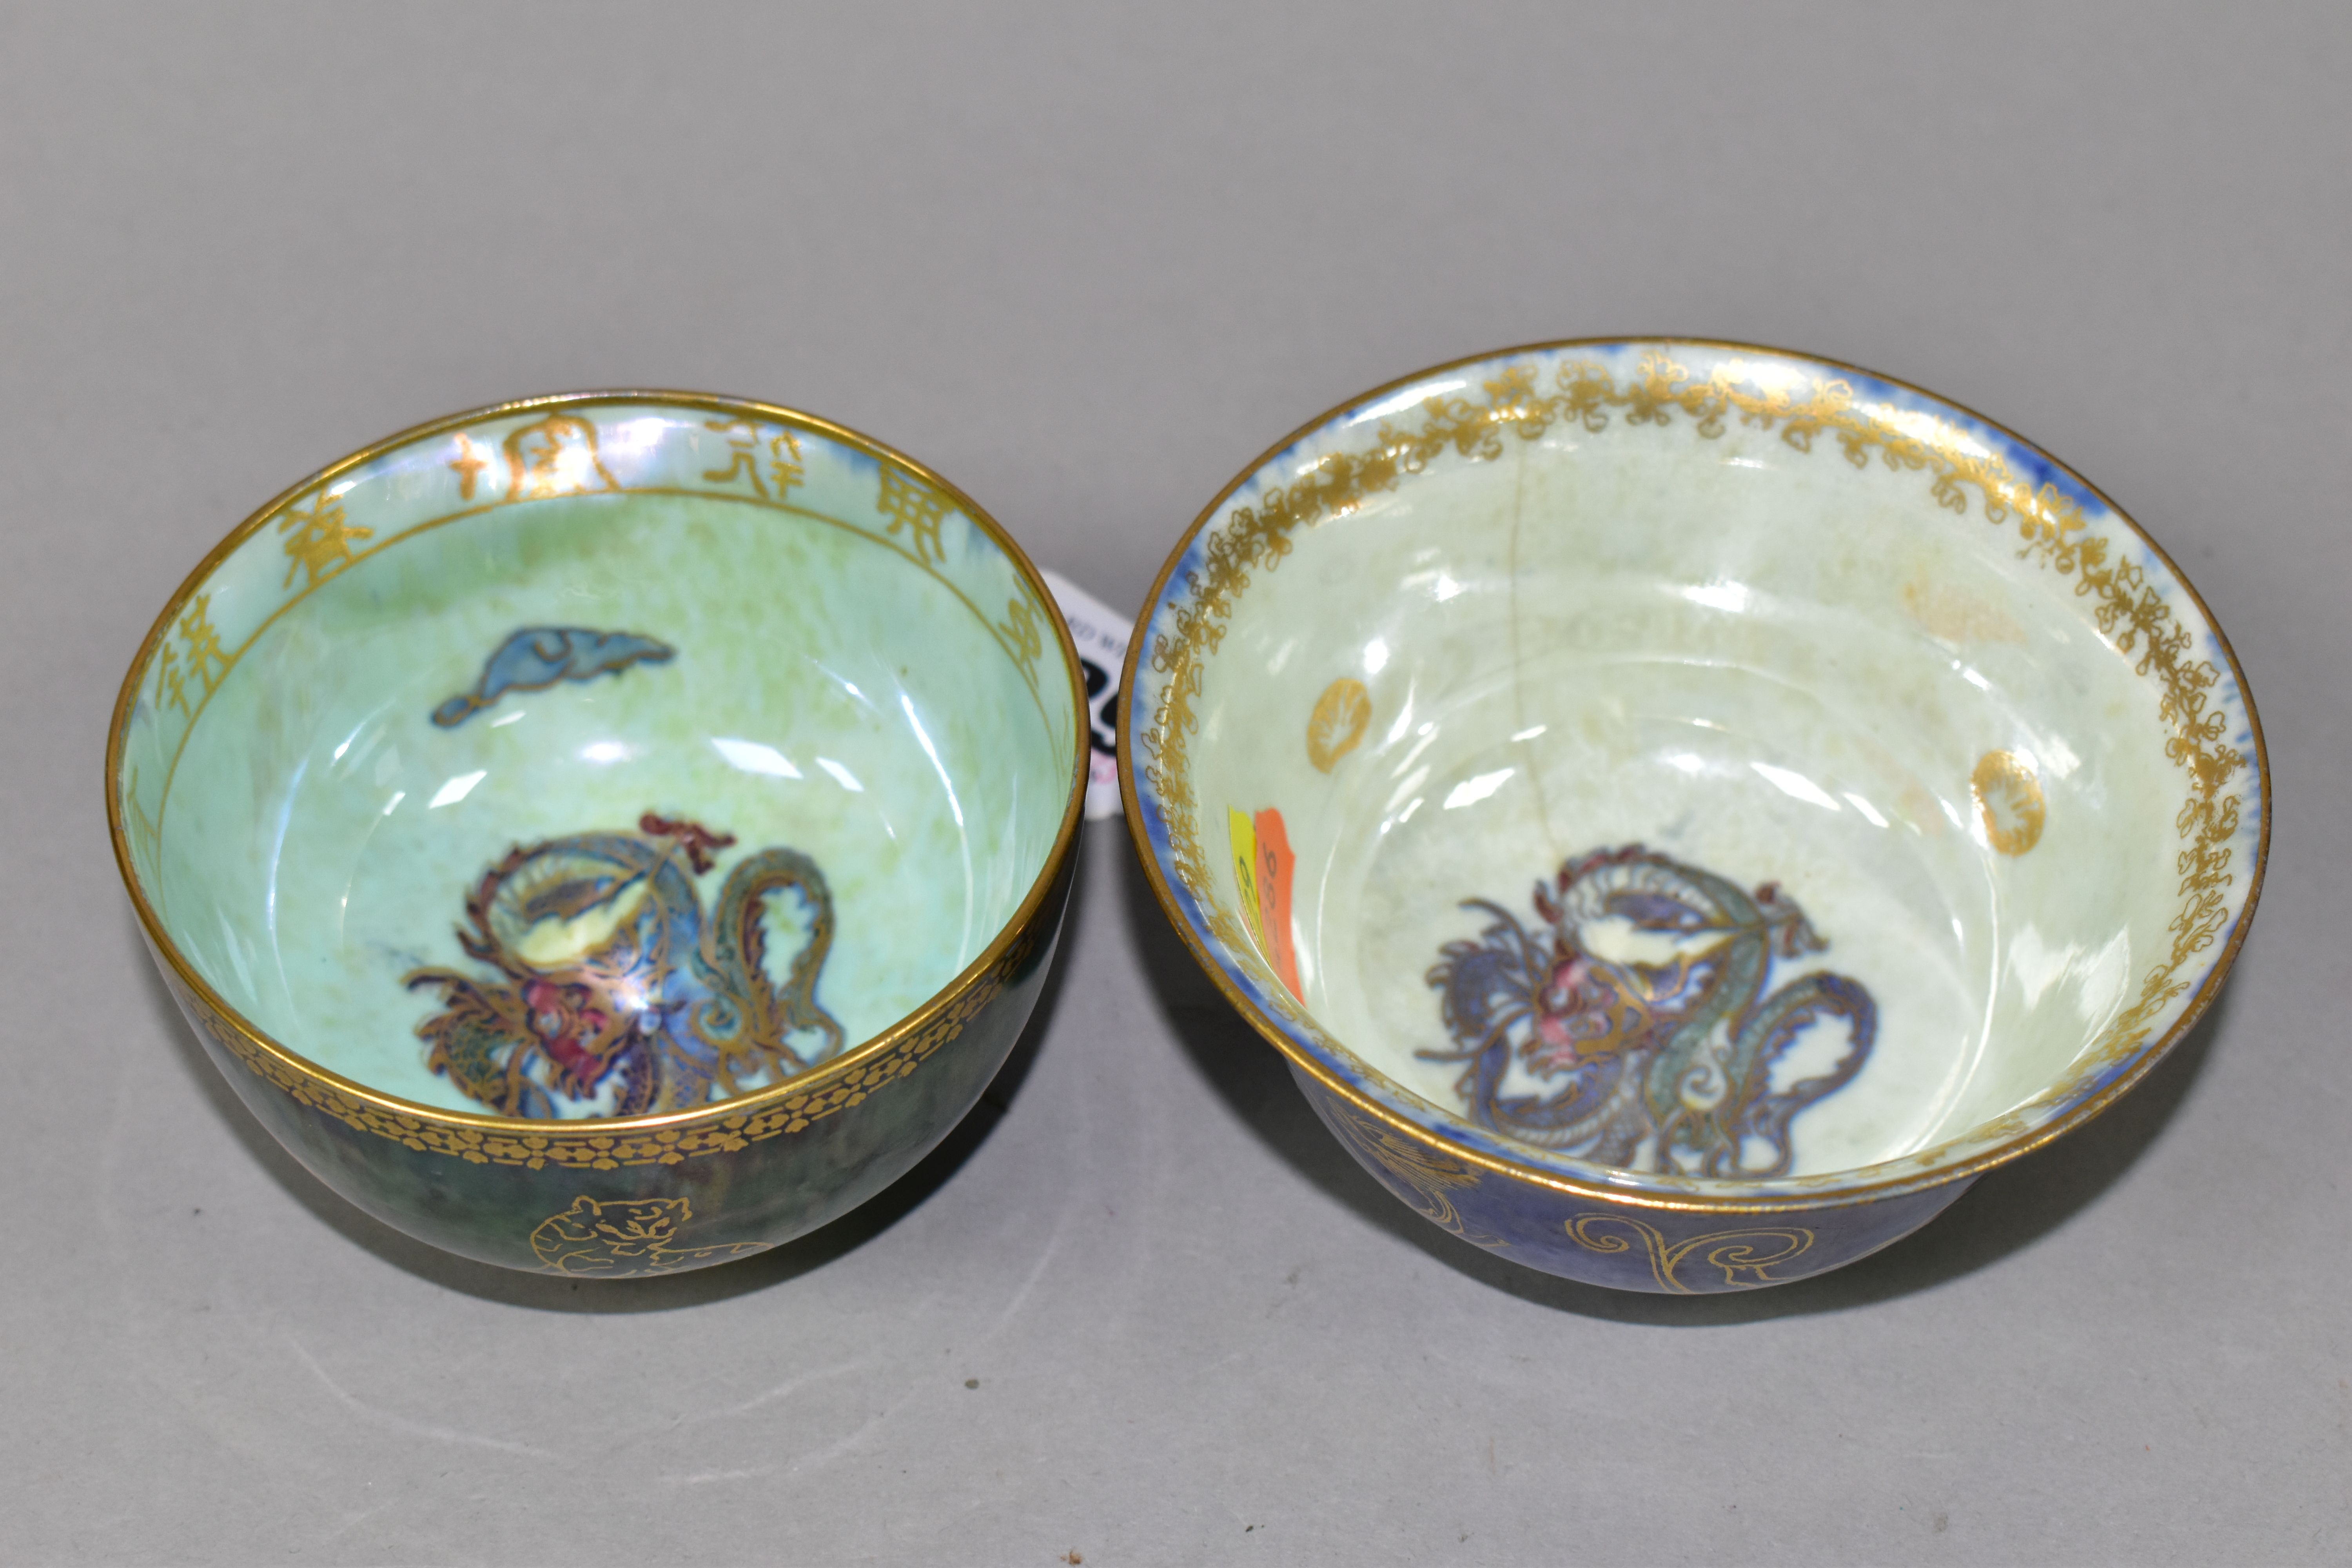 TWO WEDGWOOD BONE CHINA LUSTRE BOWLS, comprising a bowl with a blue mottled lustre exterior with a